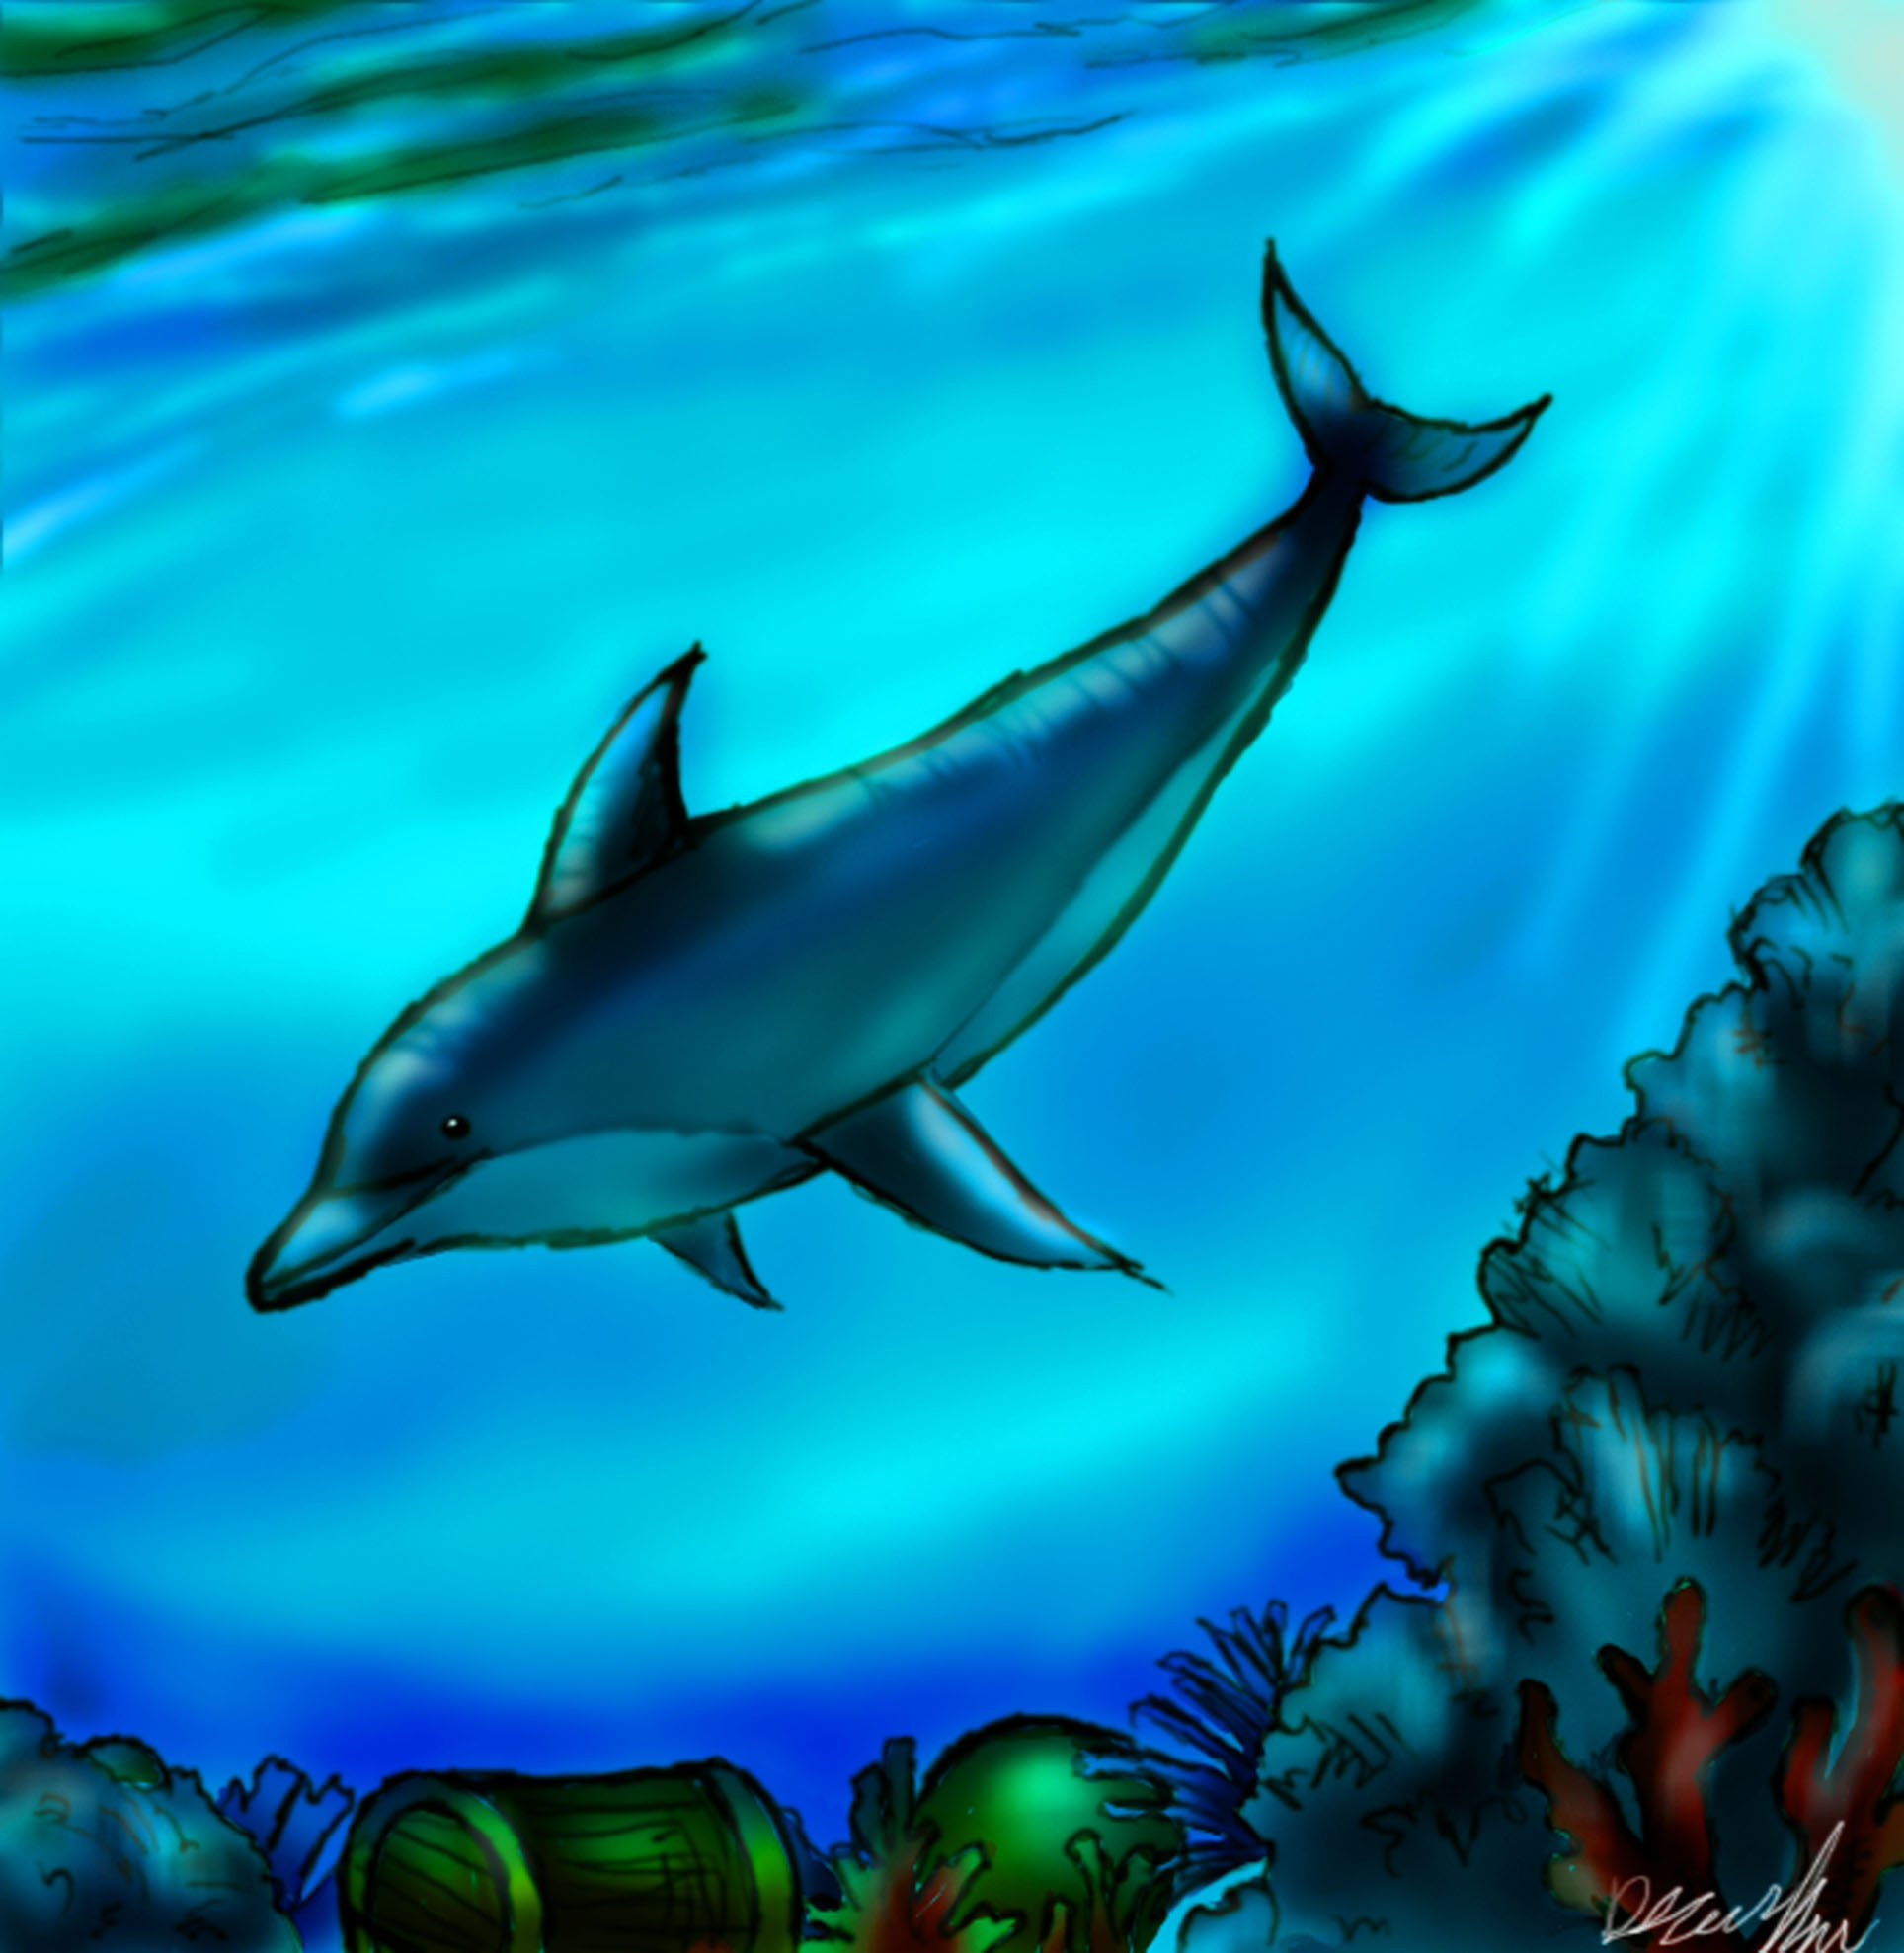 Cute Dolphin Drawing - HD Photos Gallery